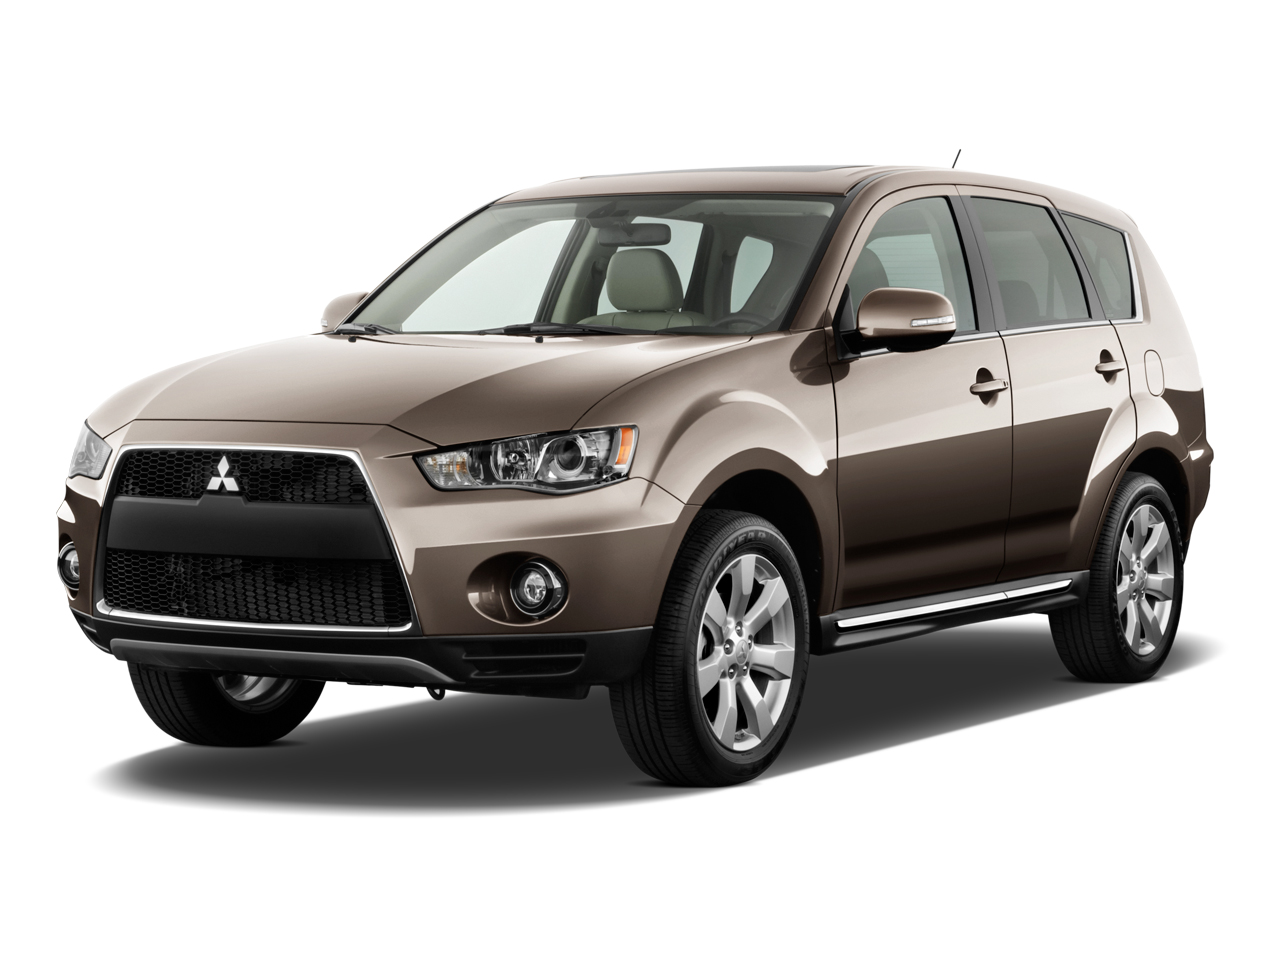 2010 Mitsubishi Outlander Review, Ratings, Specs, Prices, and Photos